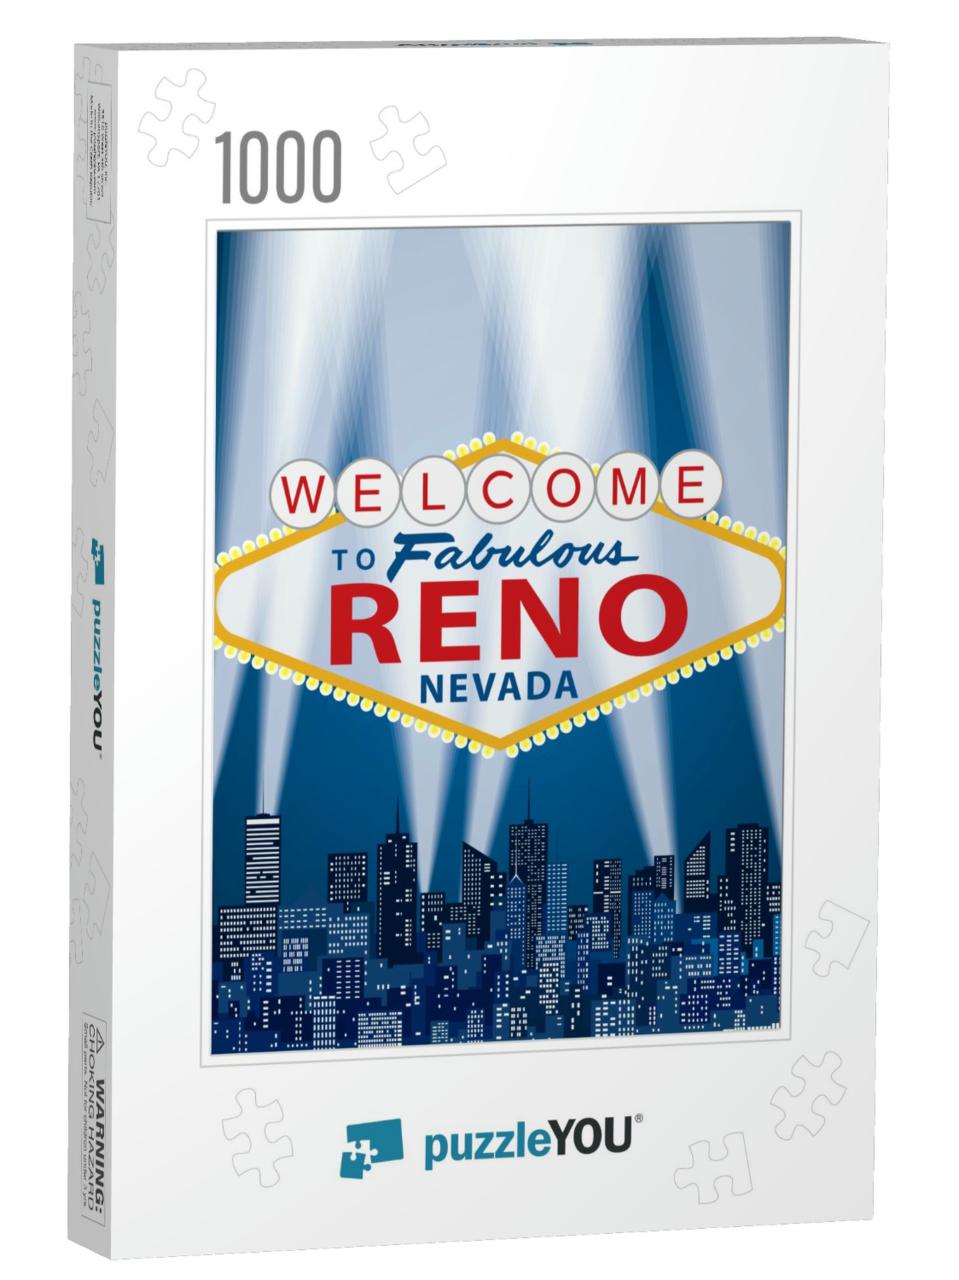 Vector Illustration of Famous Sign of Las Vegas with Reno... Jigsaw Puzzle with 1000 pieces